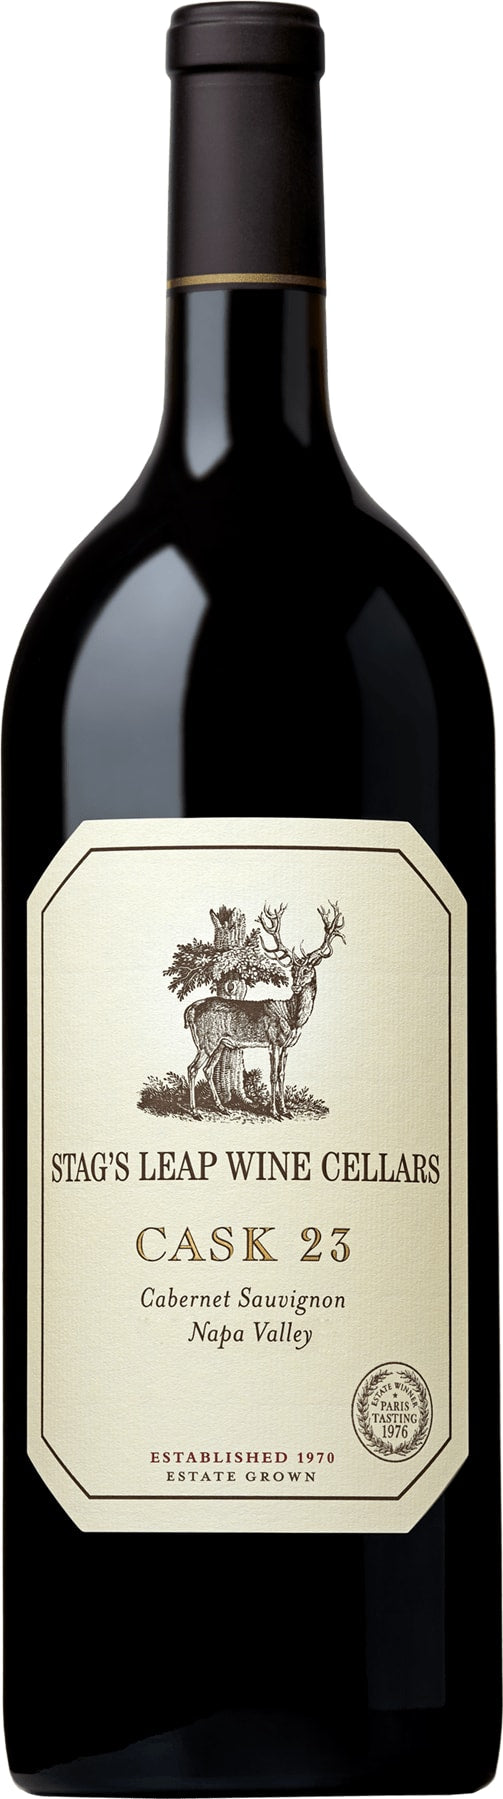 Stag's Leap Wine Cellars Cask 23 Cabernet Sauvignon Magnum 2014 150cl - Buy Stag's Leap Wine Cellars Wines from GREAT WINES DIRECT wine shop